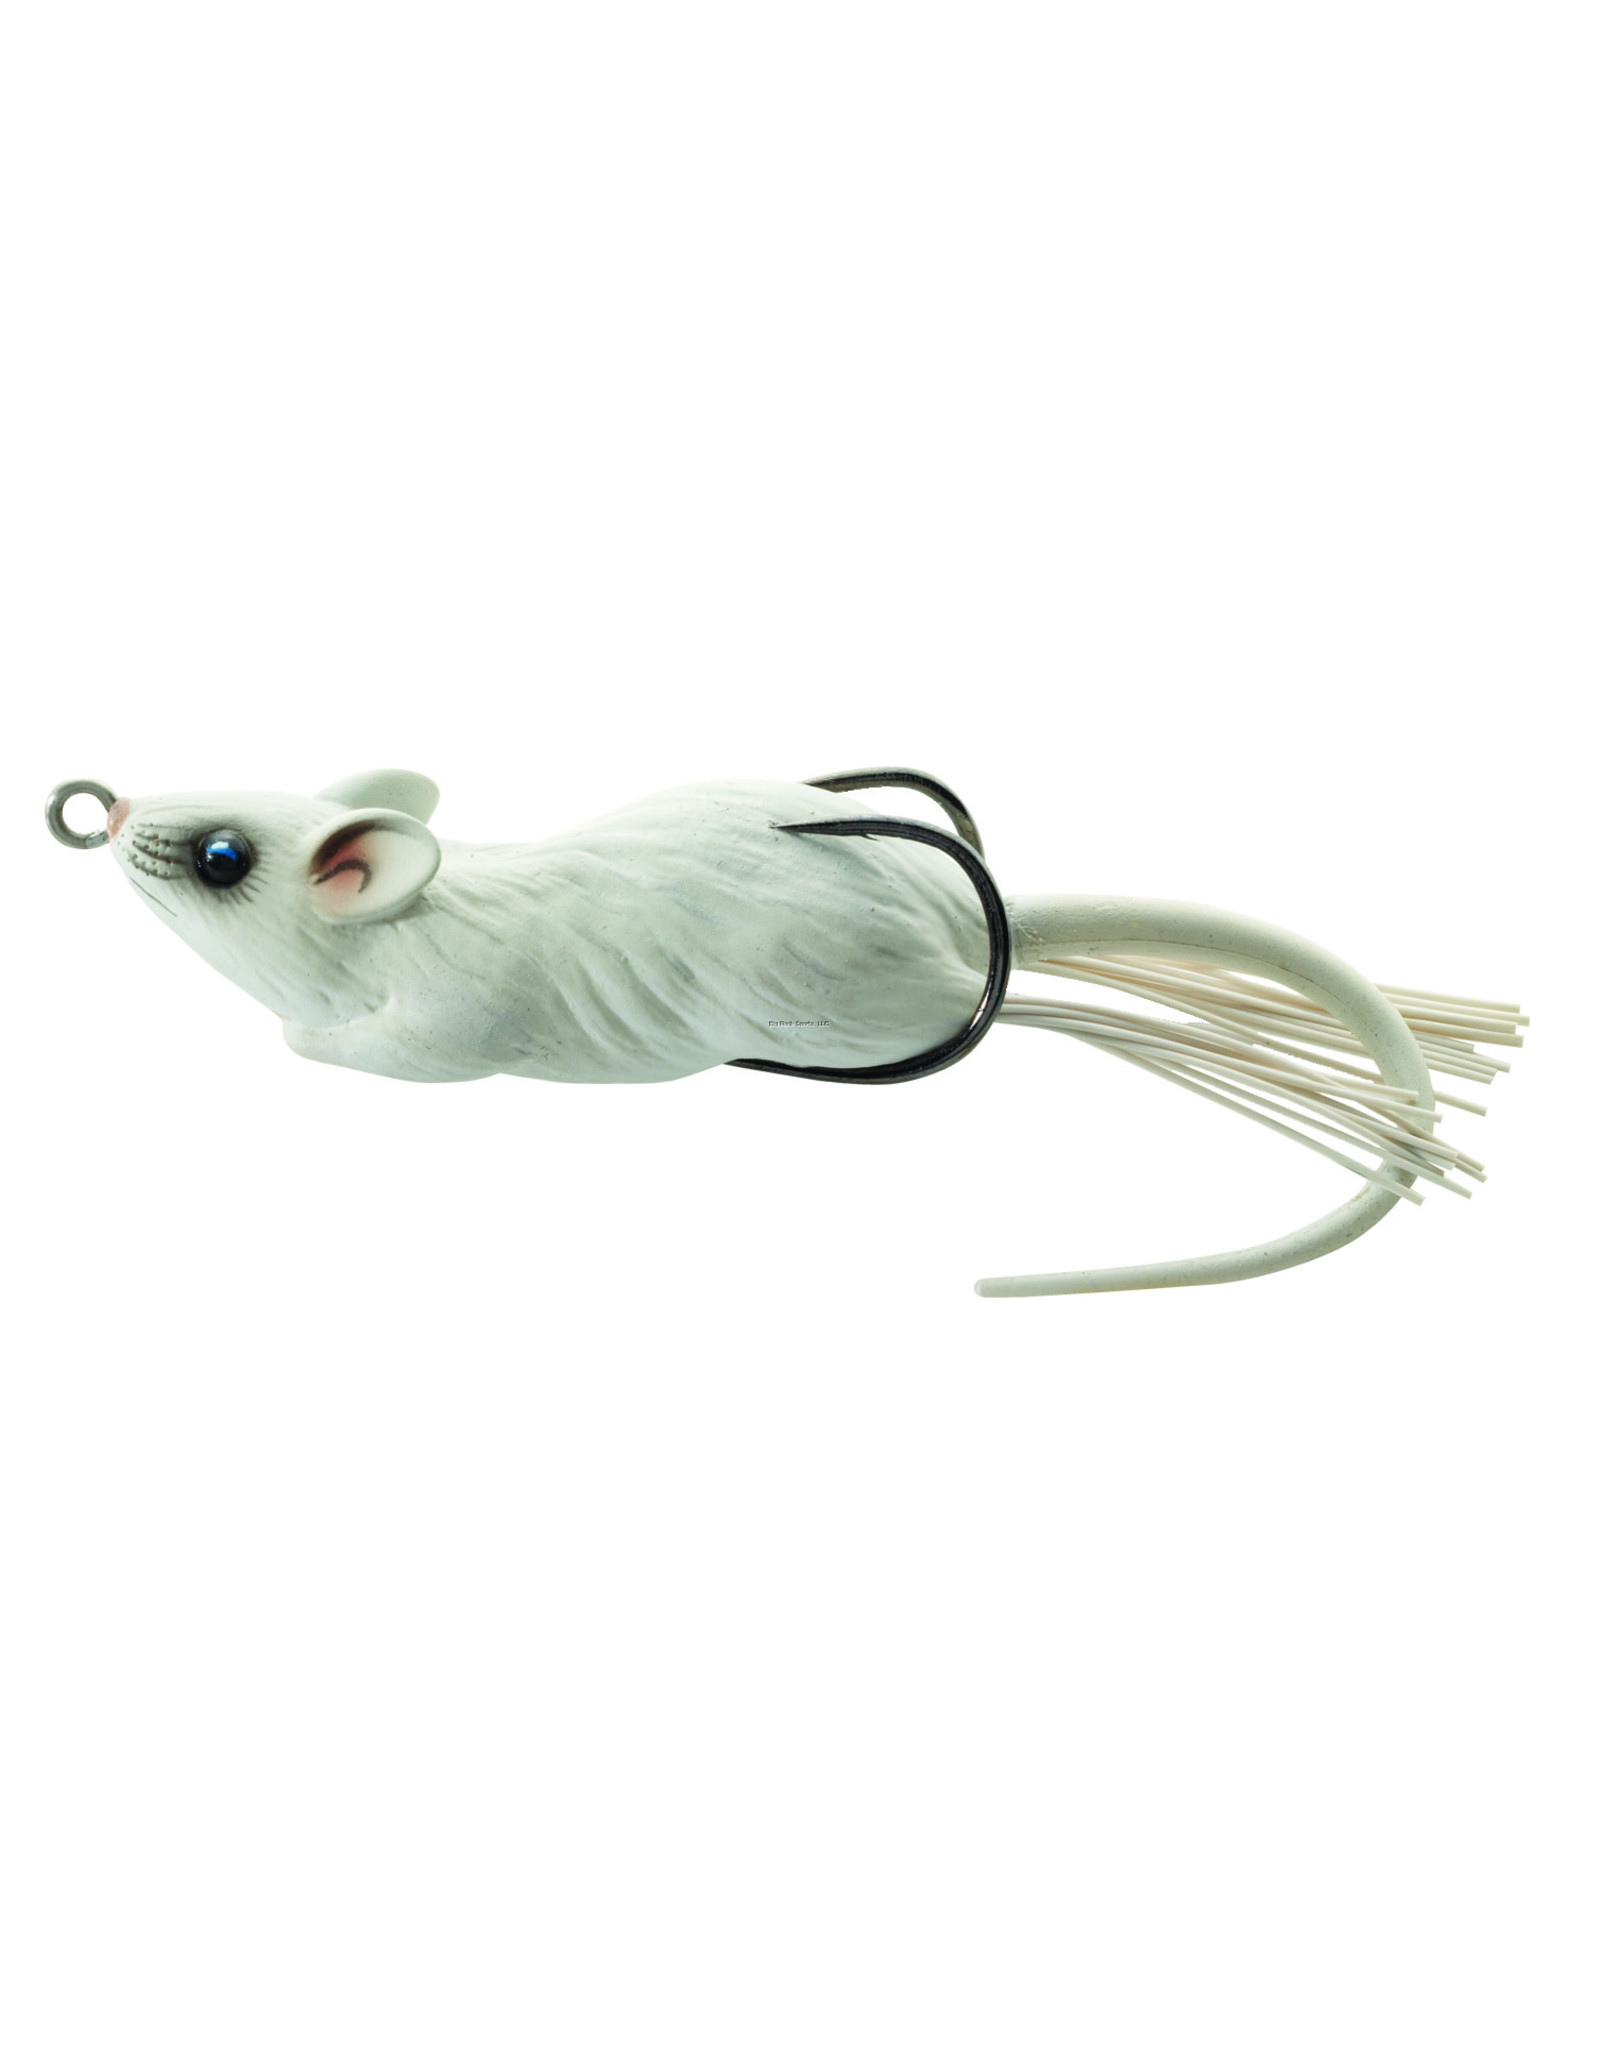 LiveTarget Mouse Hollow Body Topwater Lure, 2 3/4, 2/0 Hook, 1/2